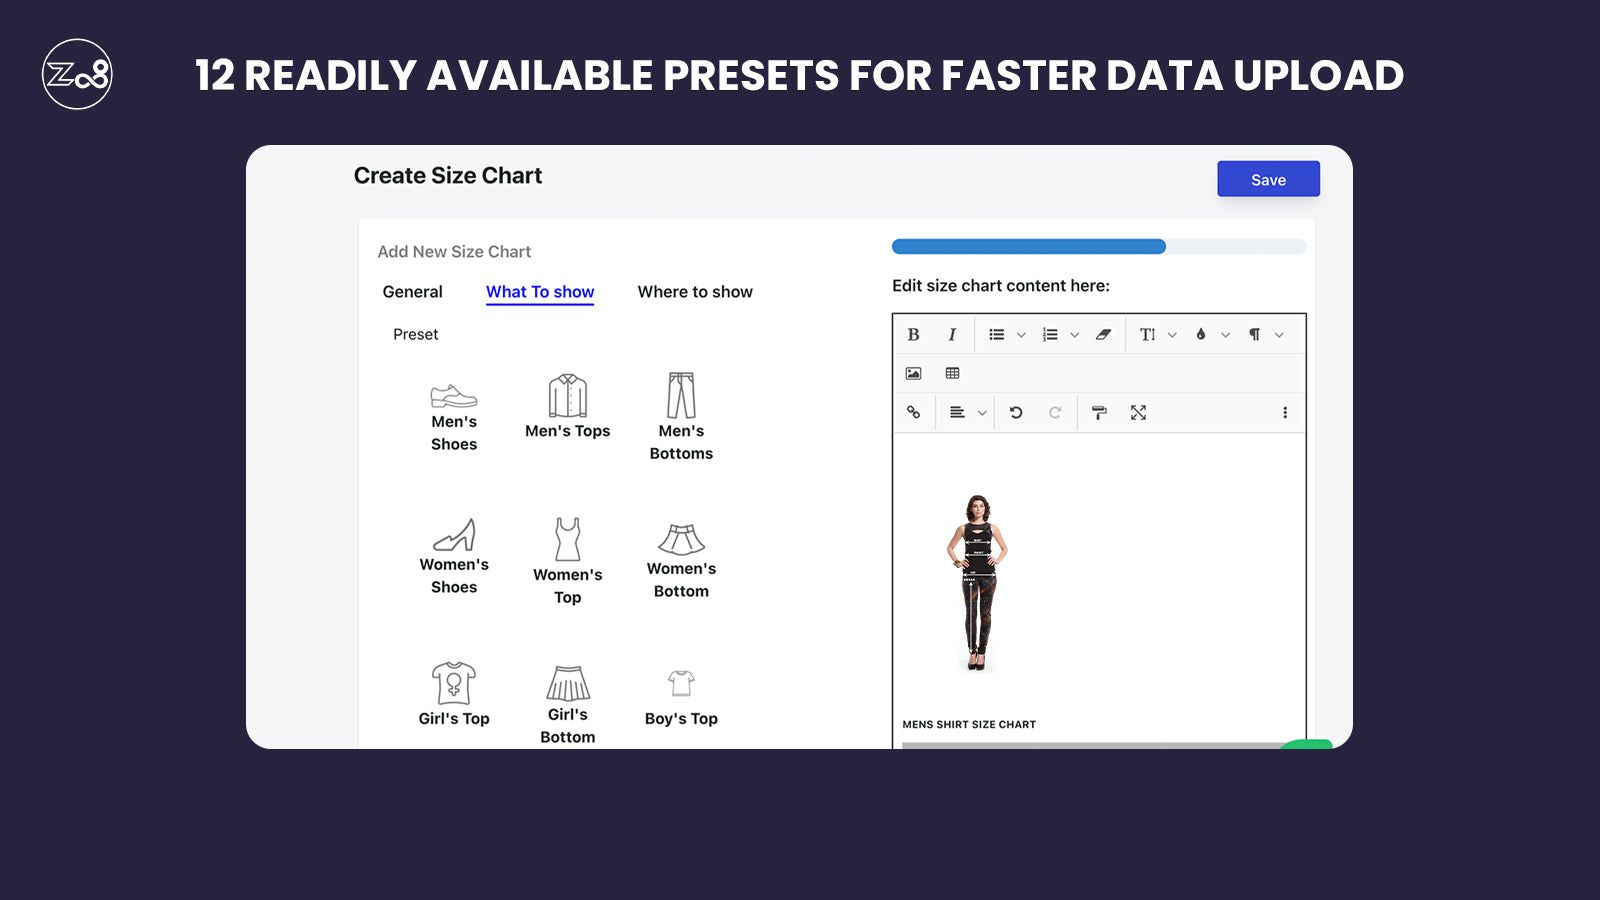 Z08 Size chart app - more than 12 presets available